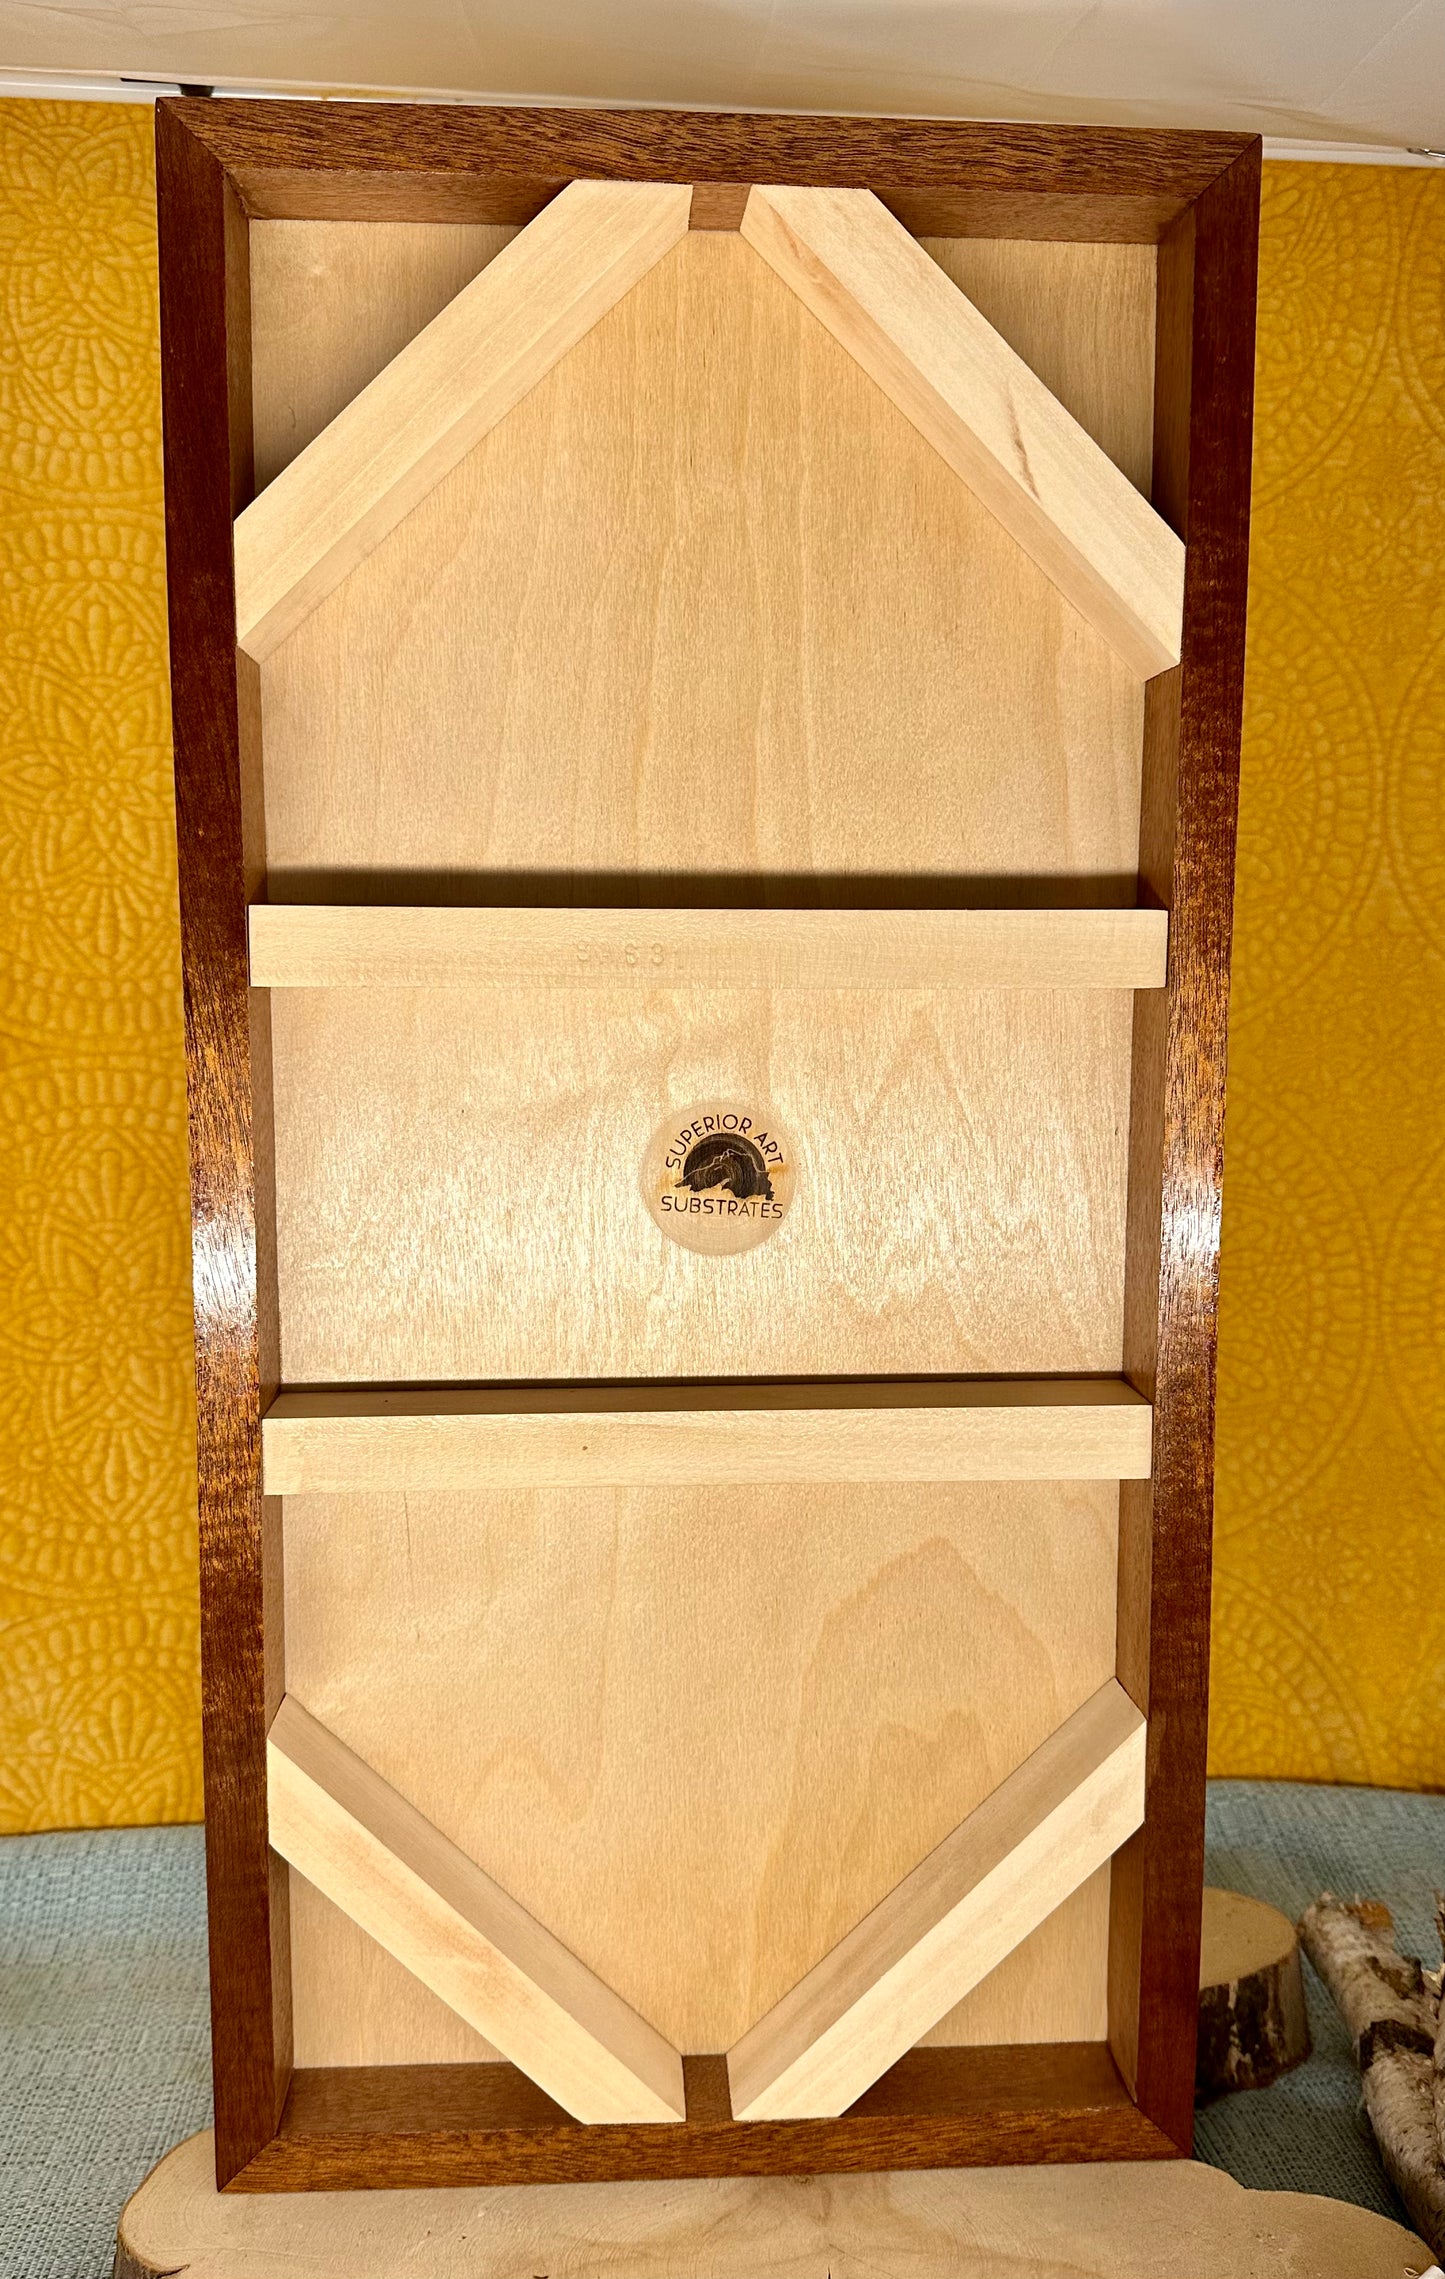 African Mahogany and Baltic Birch 12" x 24" Hardwood Cradled Substrate